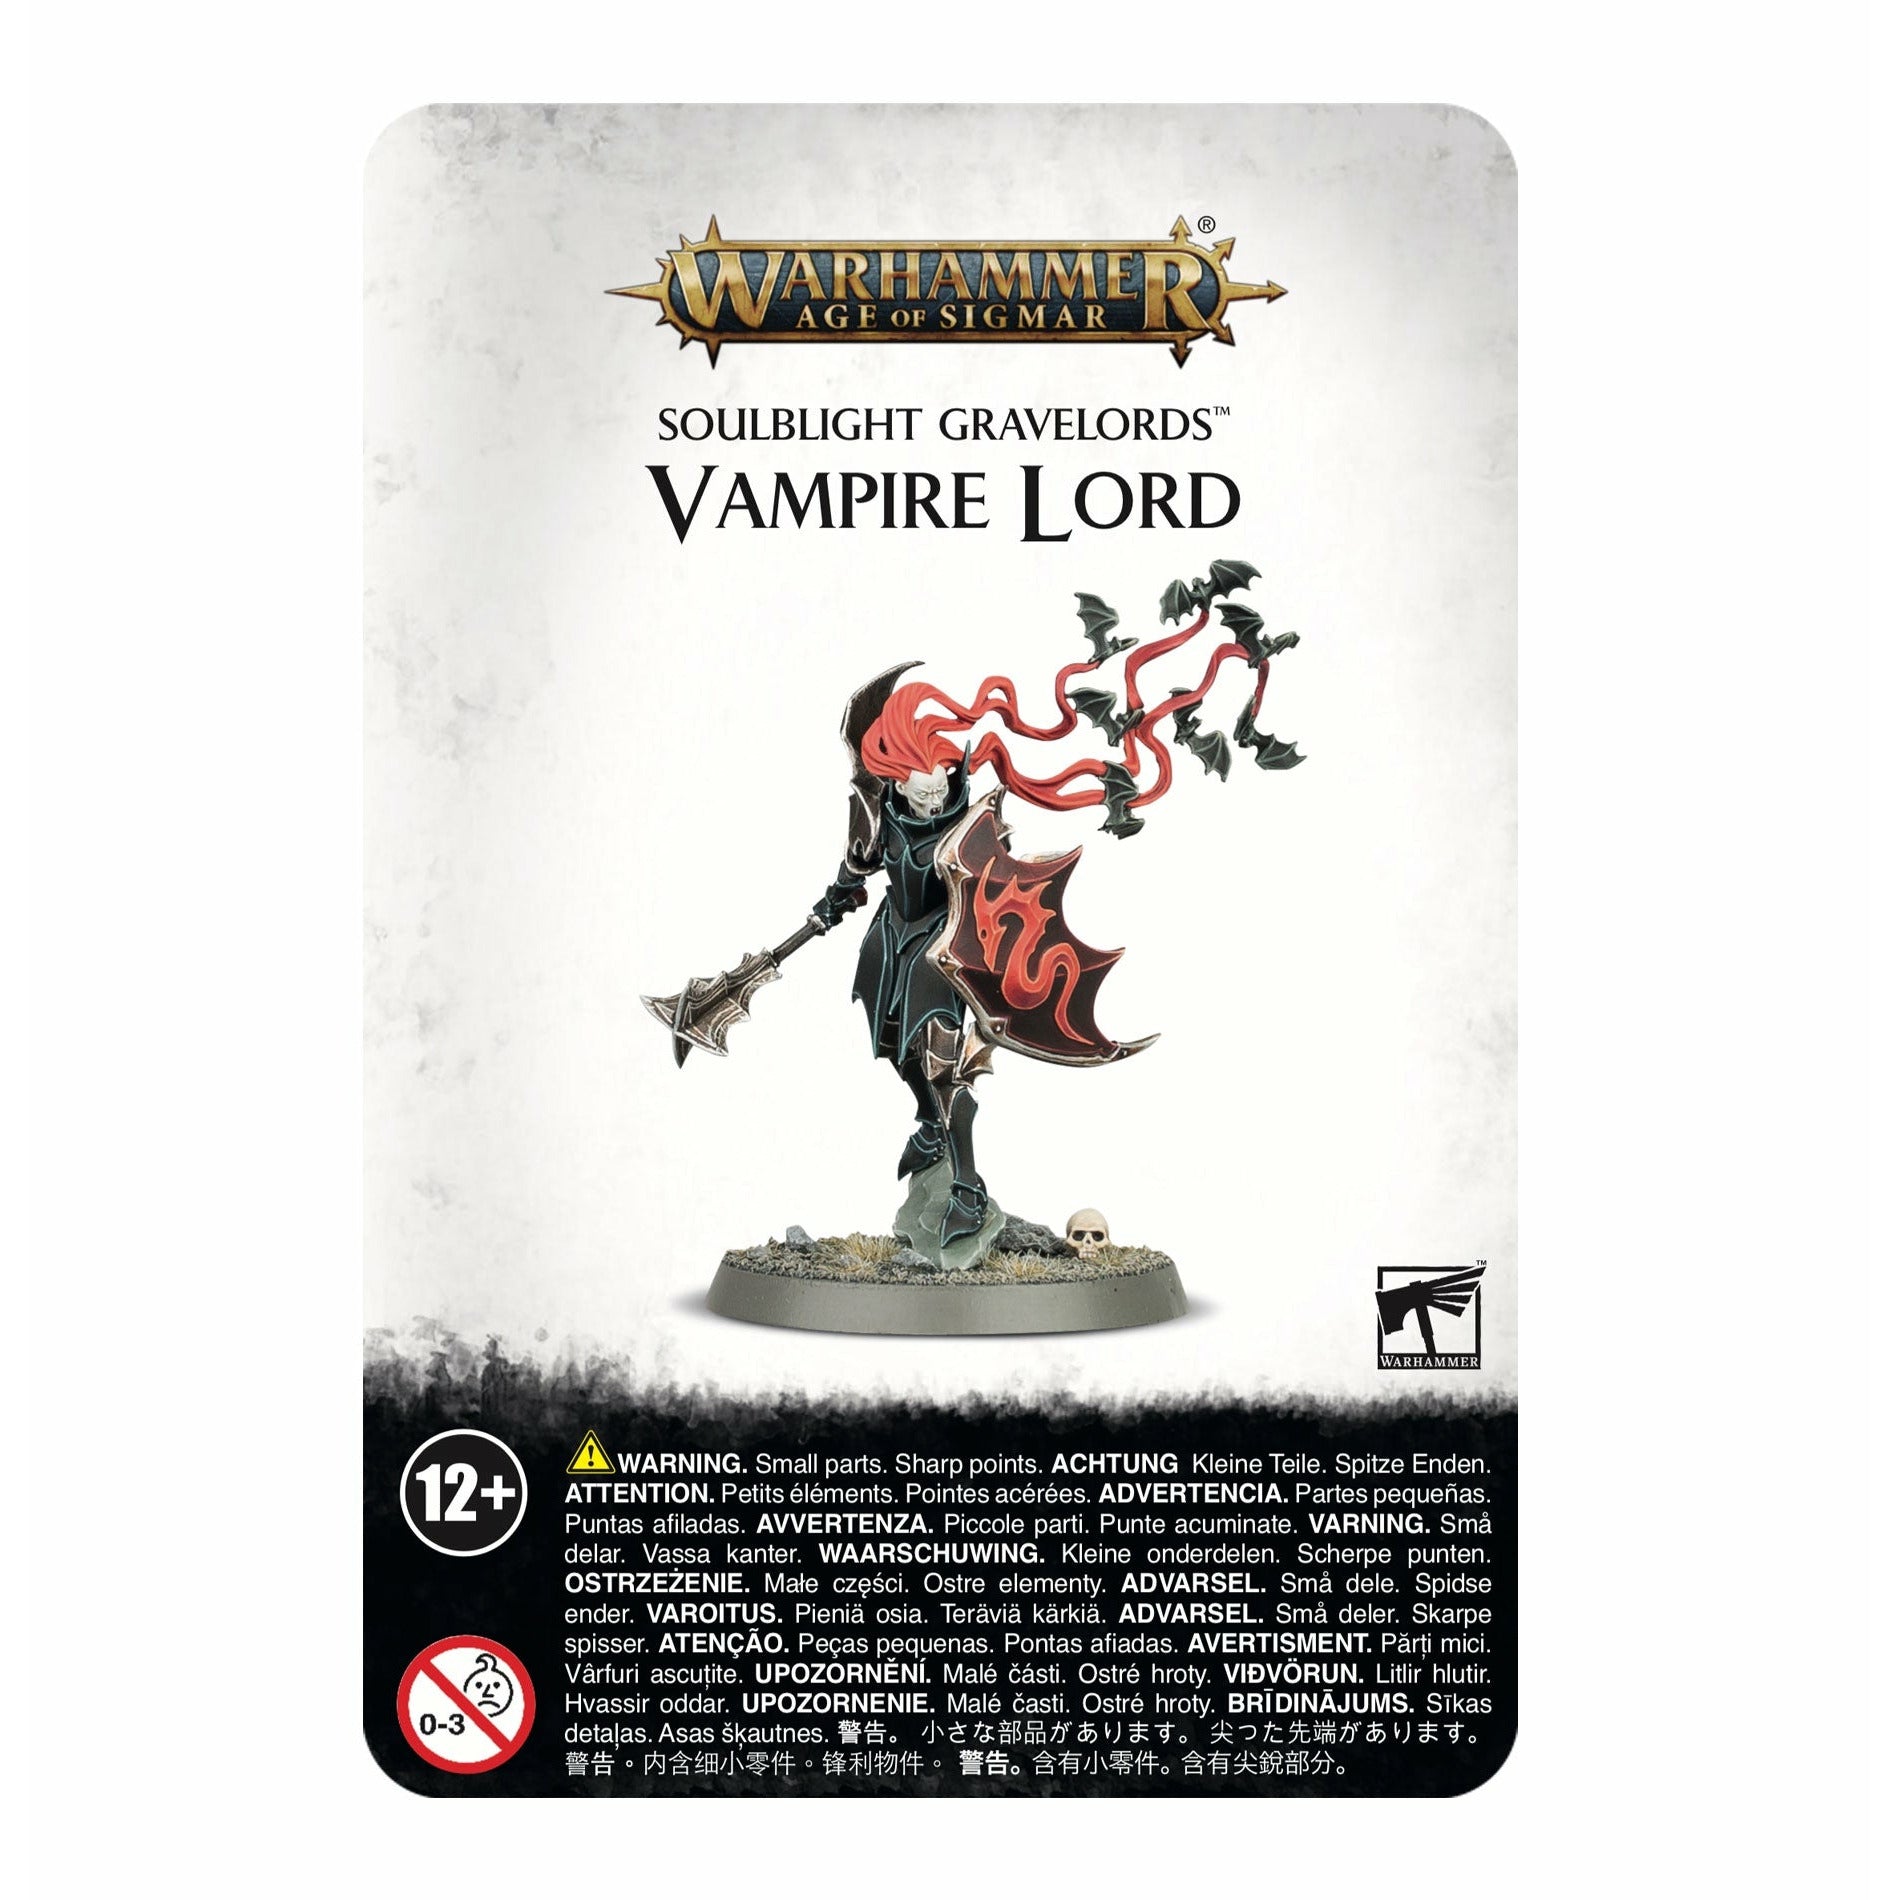 Age of Sigmar: Soulblight Gravelords Vampire Lord